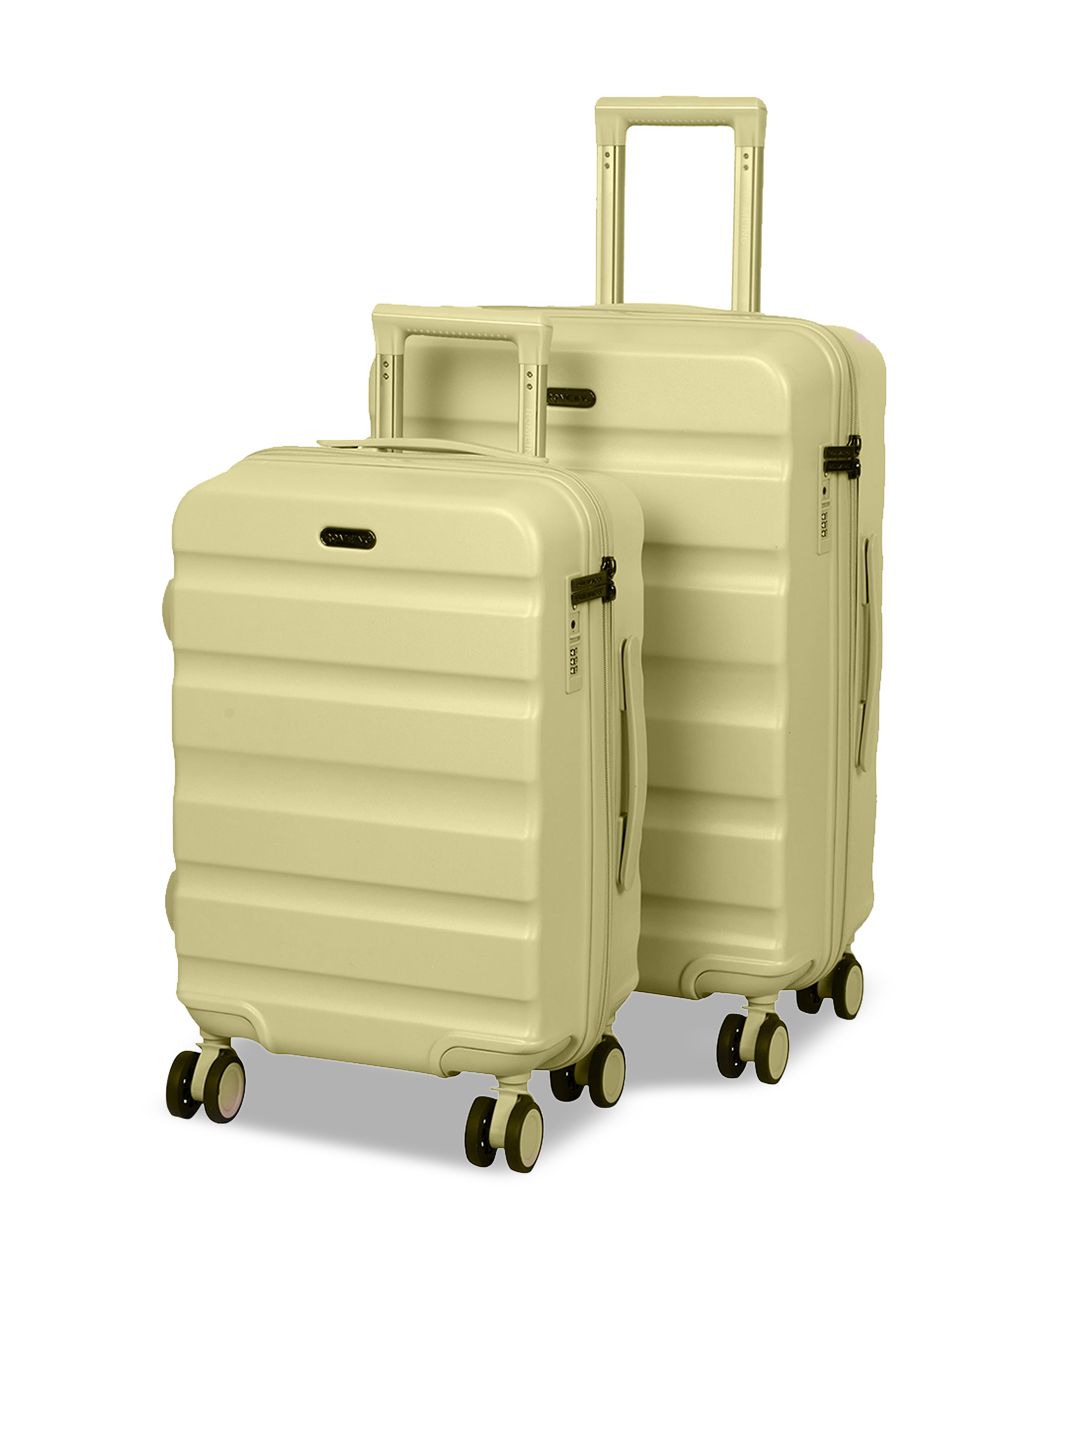 ROMEING Venice Set Of 2 Yellow Textured Hard Sided Polycarbonate Trolley Suitcase Price in India